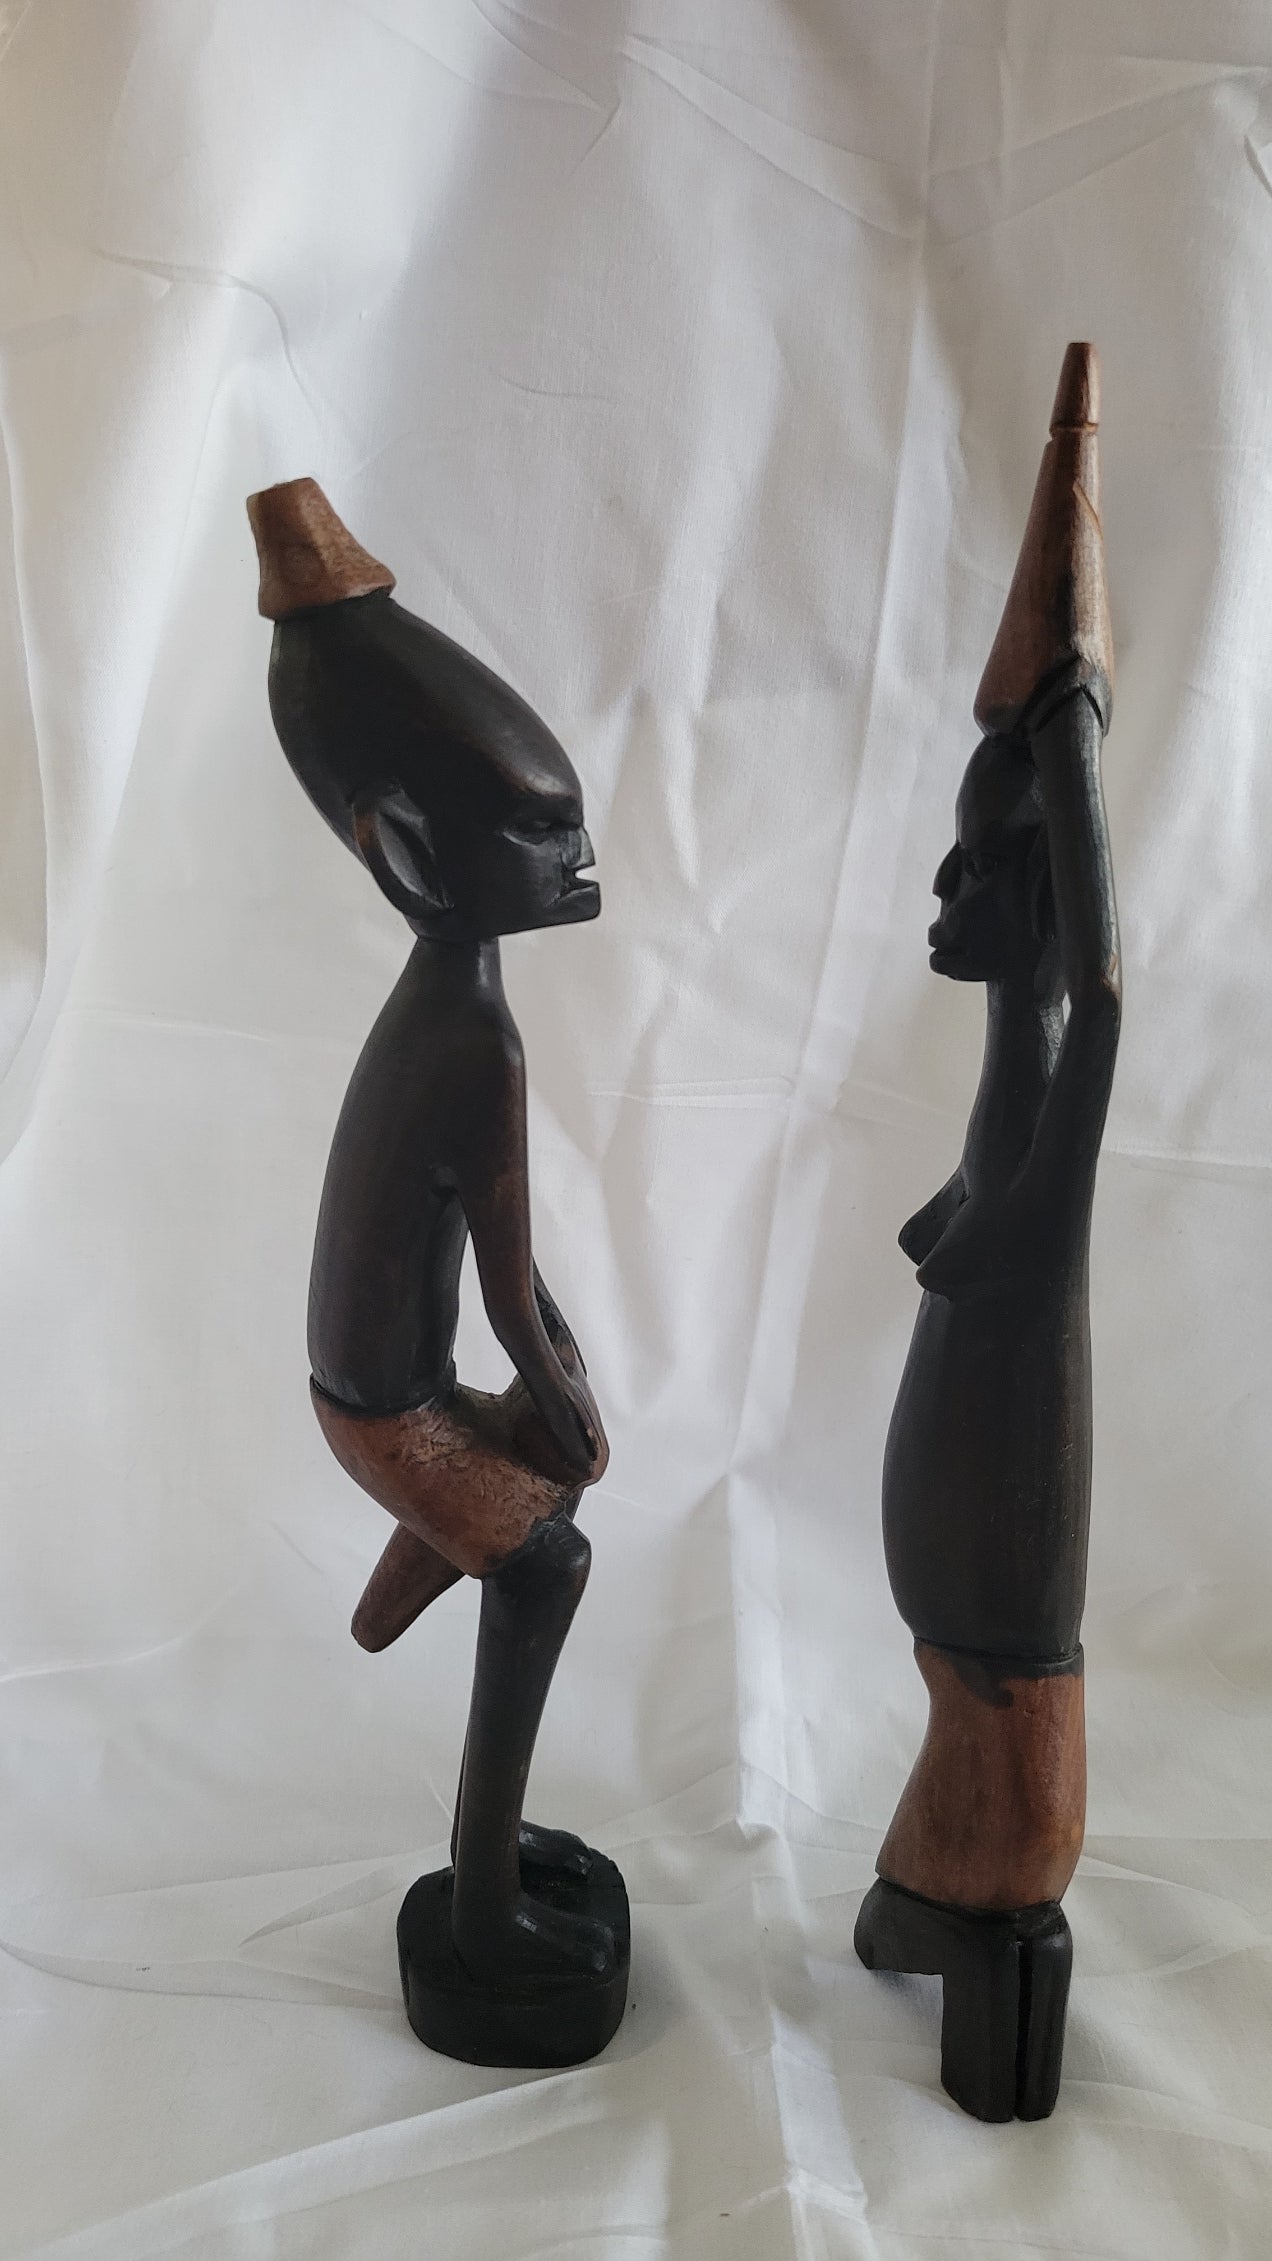 Set of two vintage wooden figures, male holding drum between knees, women with basket on head. Side view.